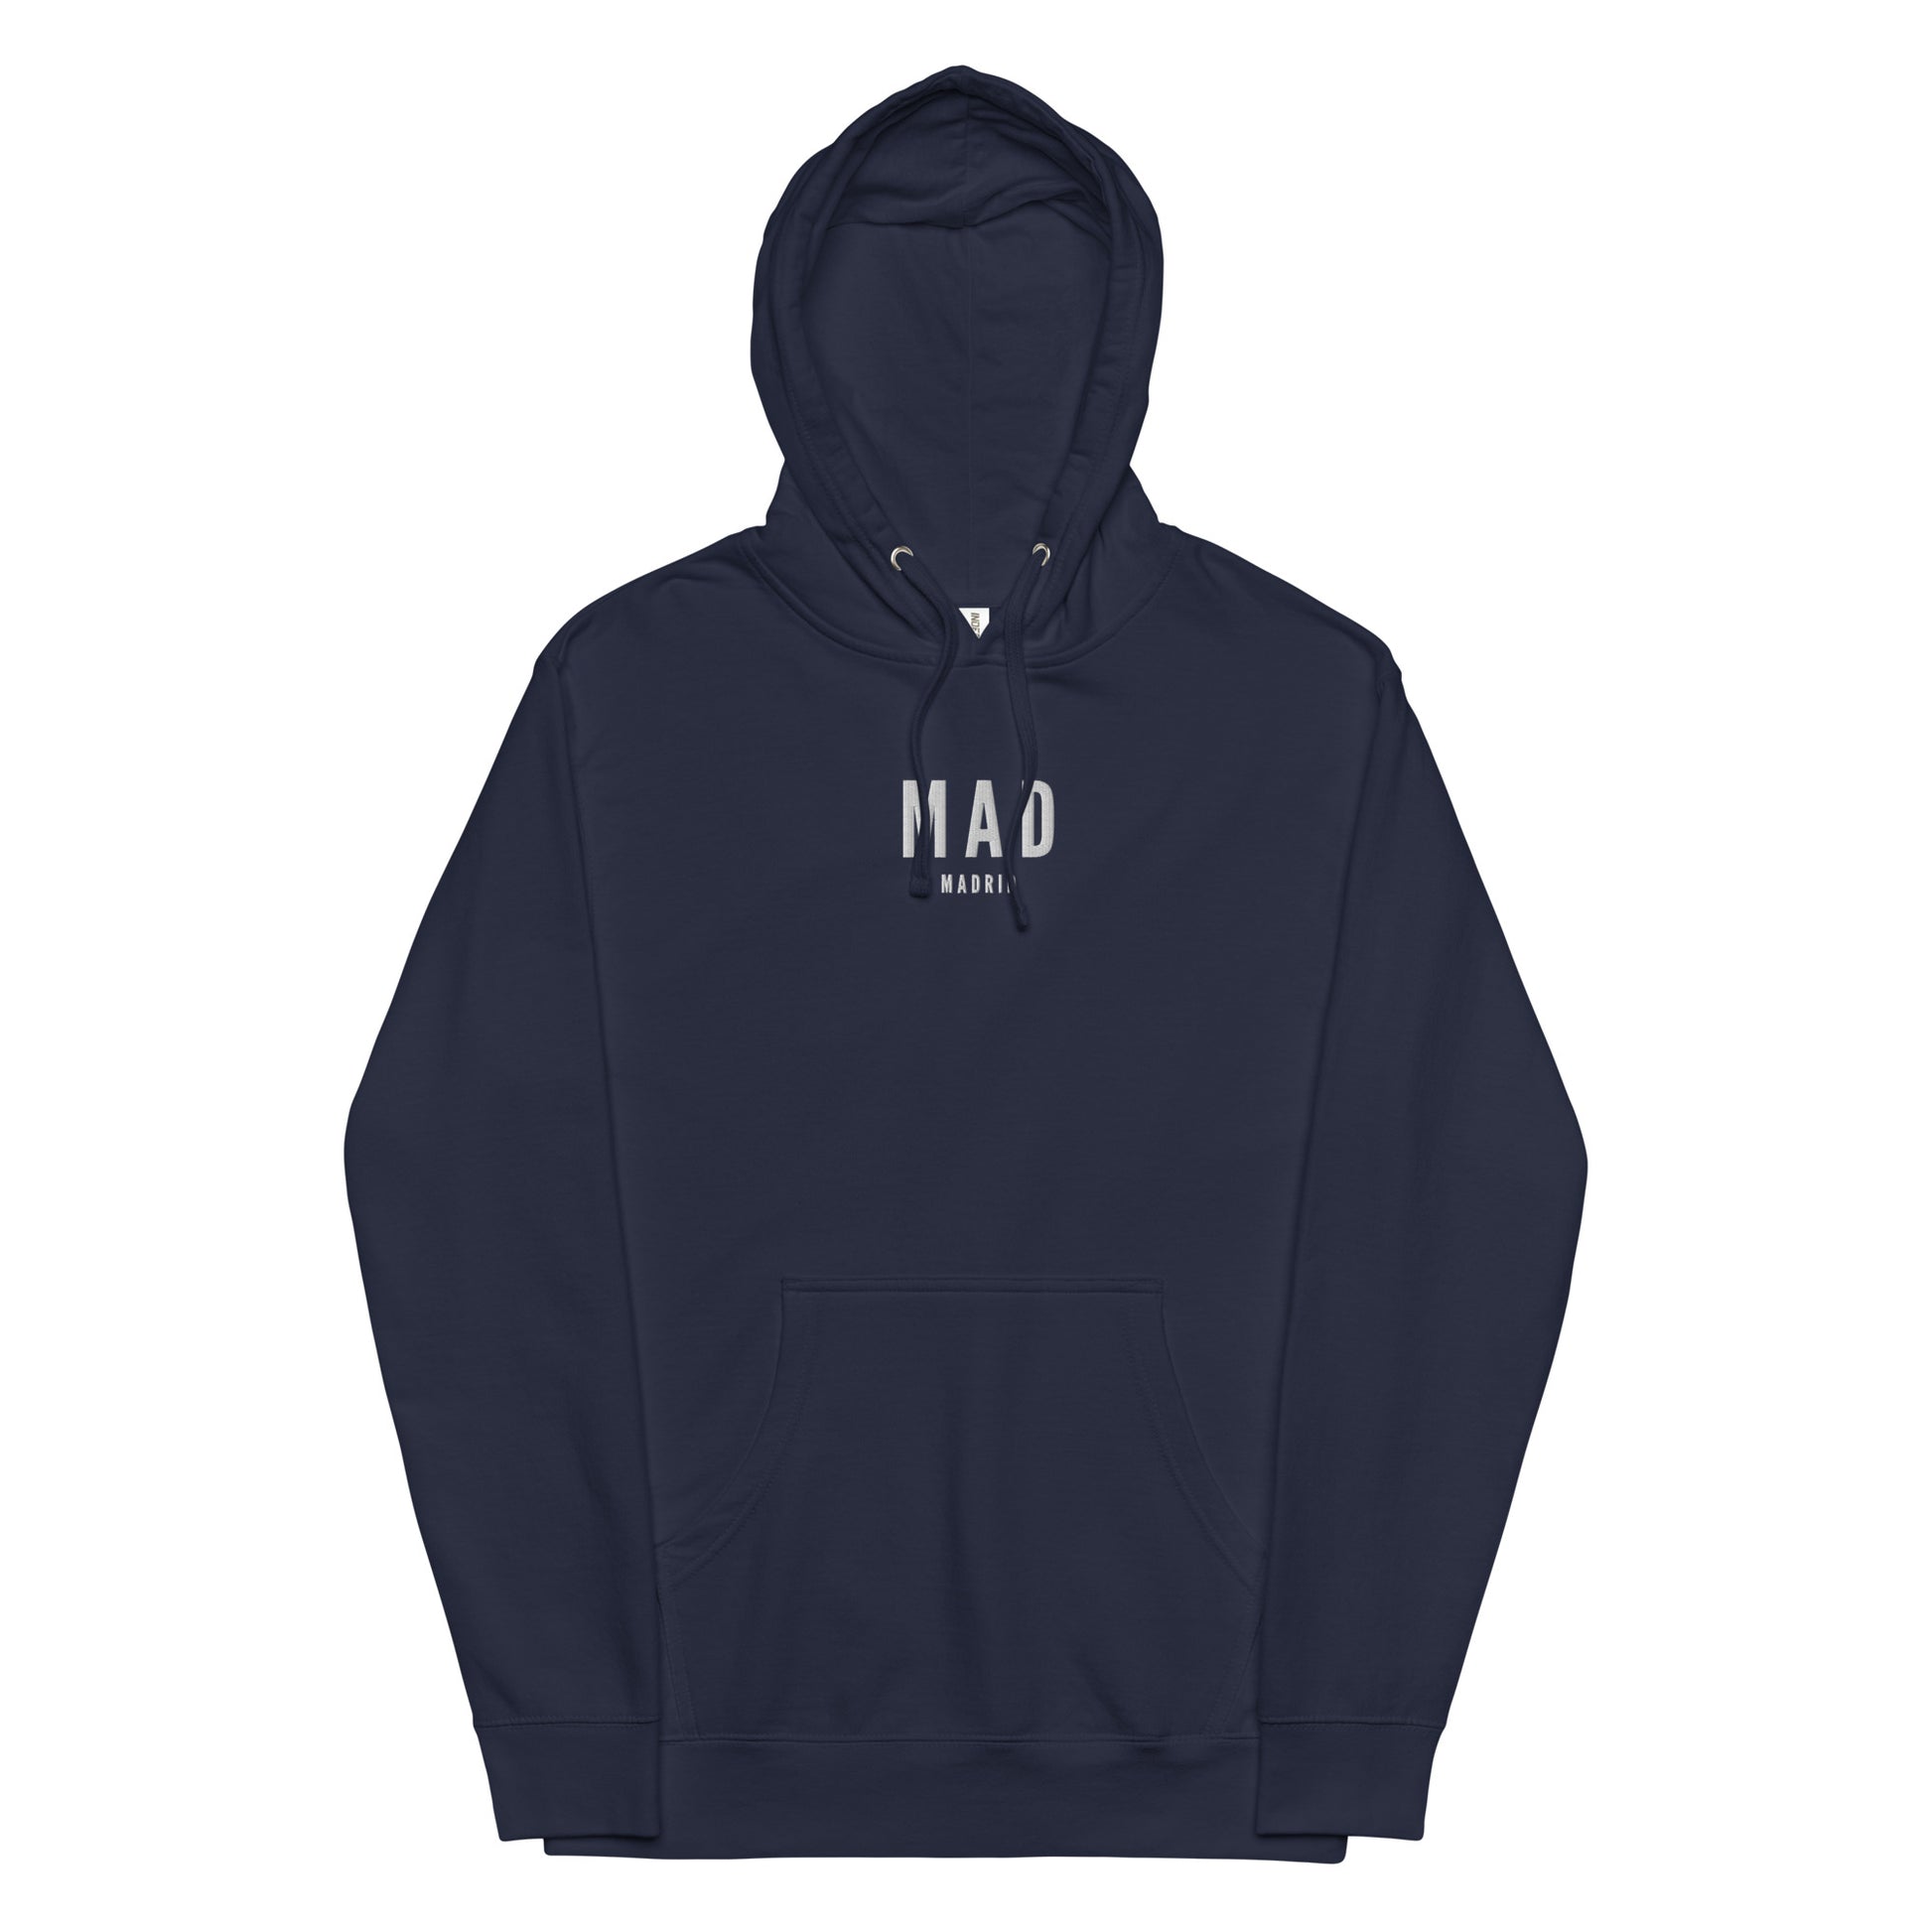 City Midweight Hoodie - White • MAD Madrid • YHM Designs - Image 11